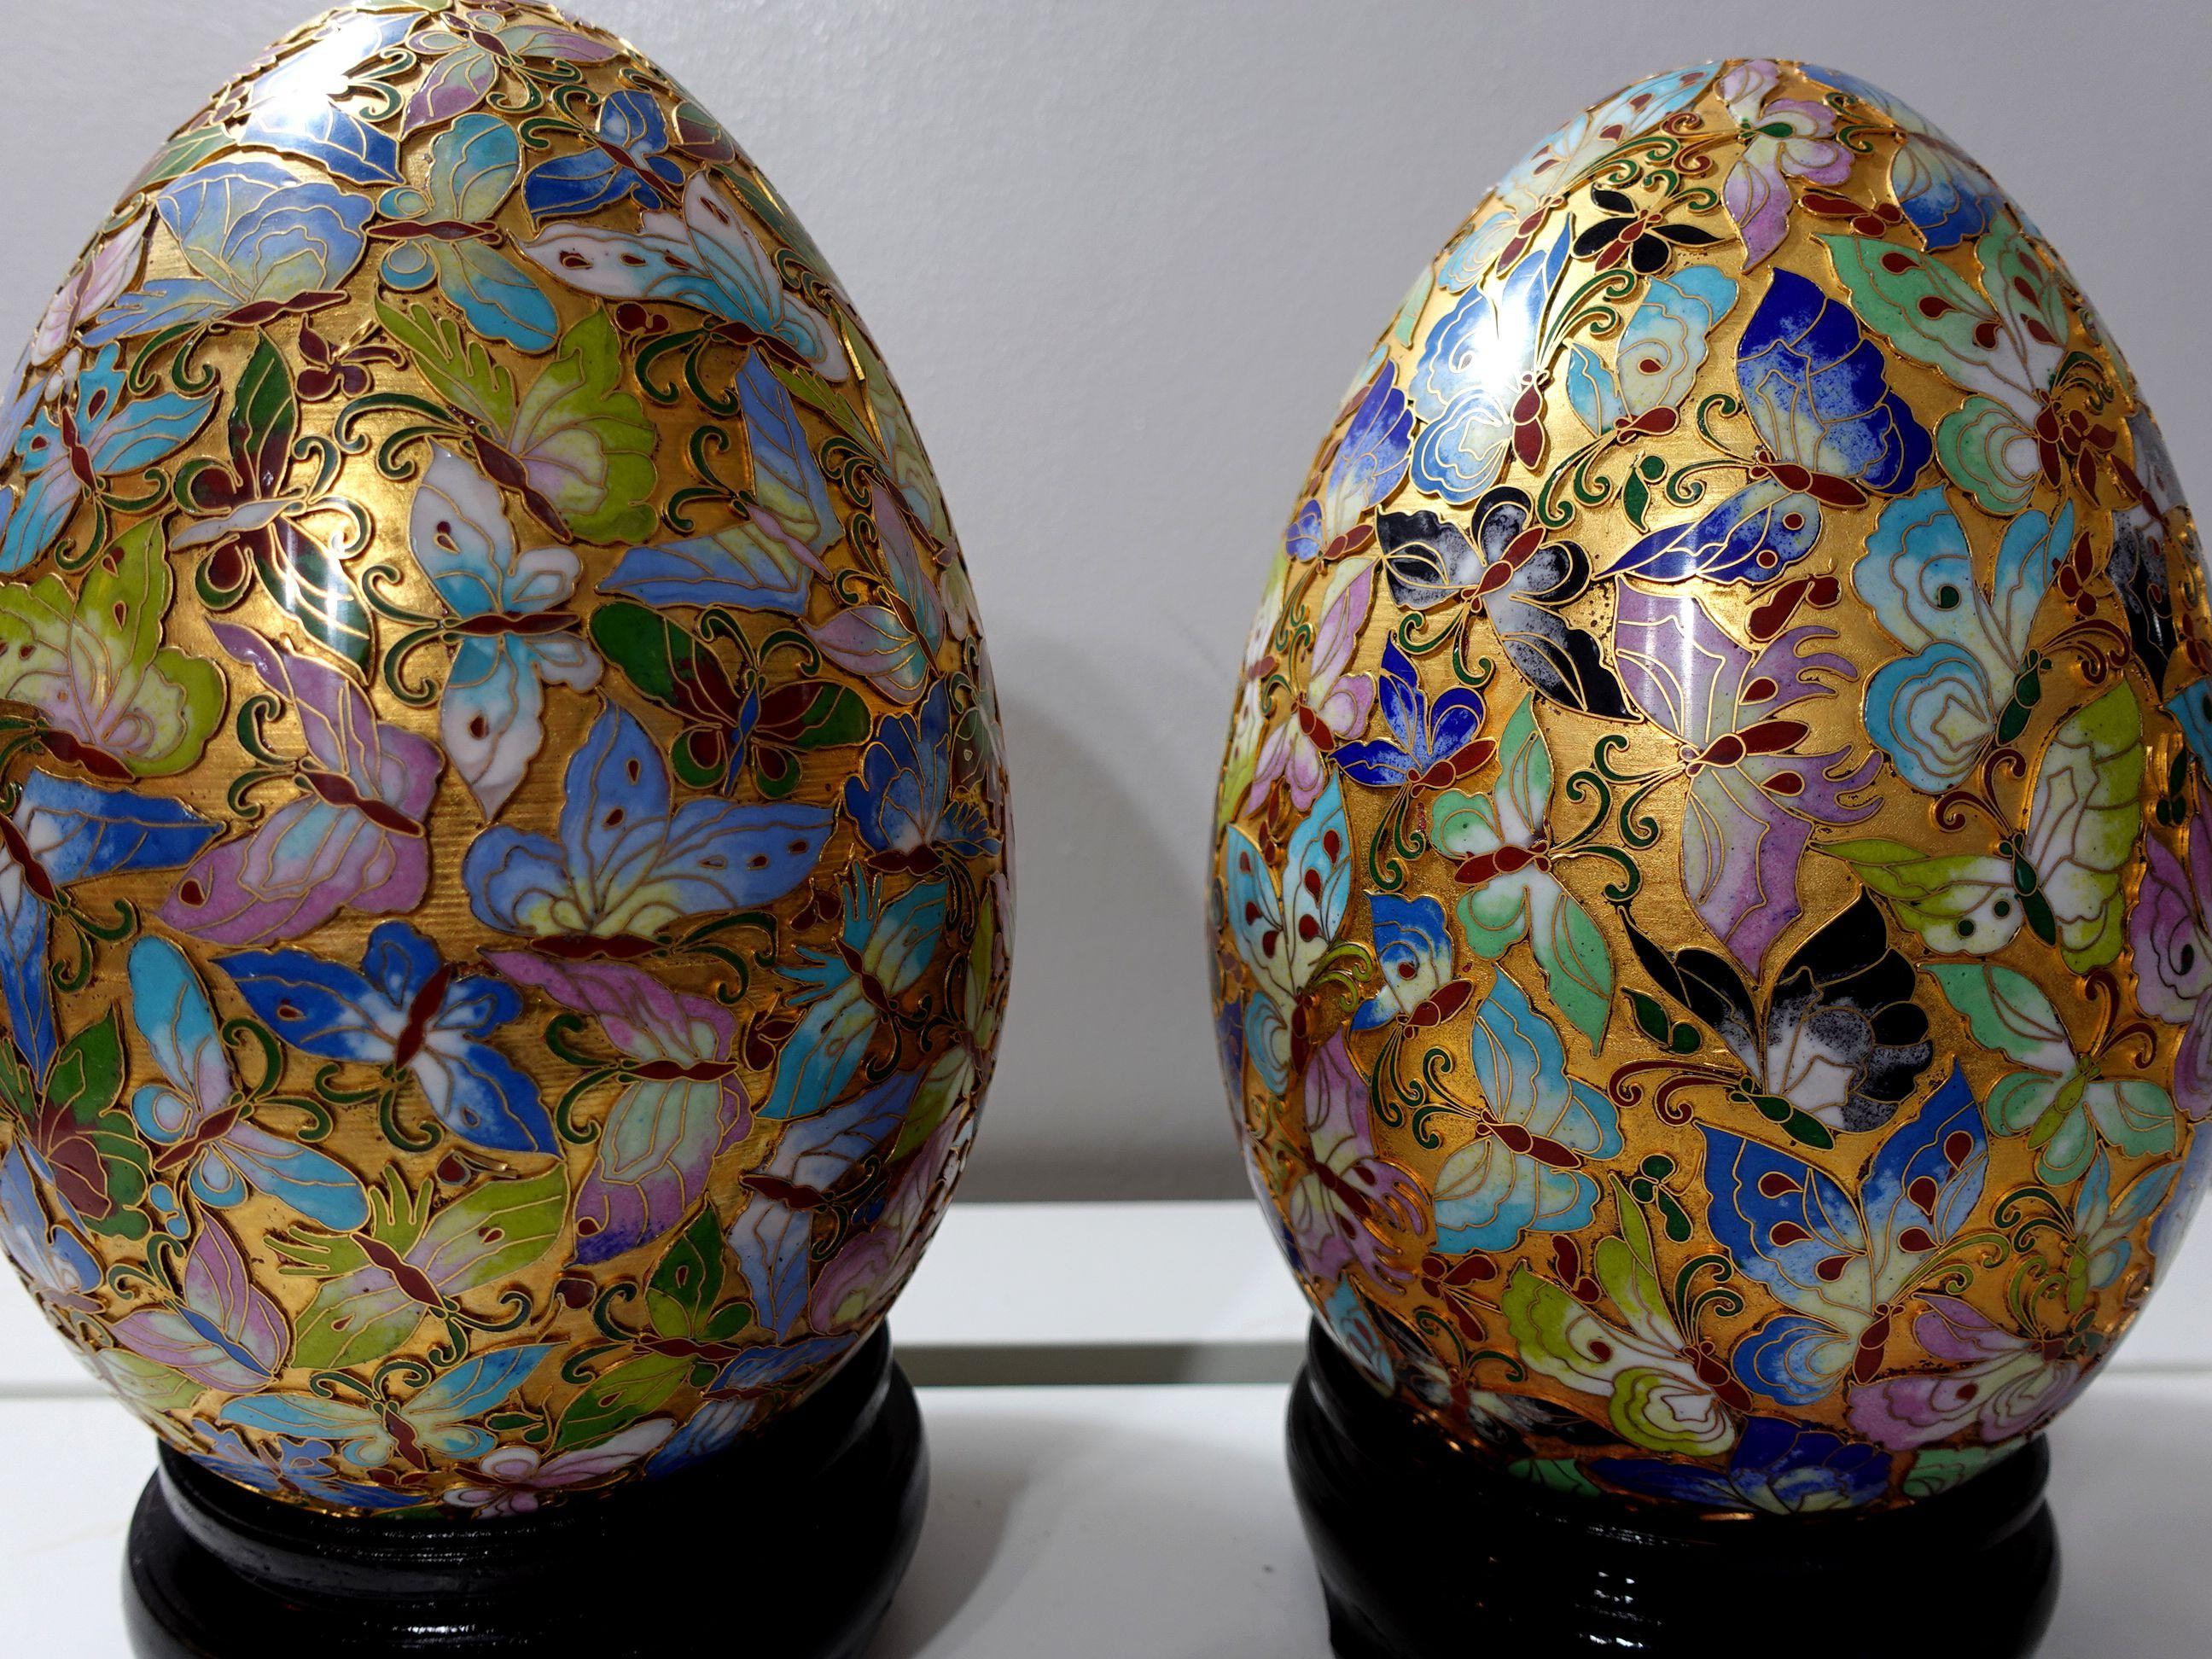 Presenting a pair of huge and beautiful Chinese cloisonné enamel eggs with intricated patterns of hundred butterflies made by hand seating on a wood stand, from the early 20 century. 
Dimensions: 11